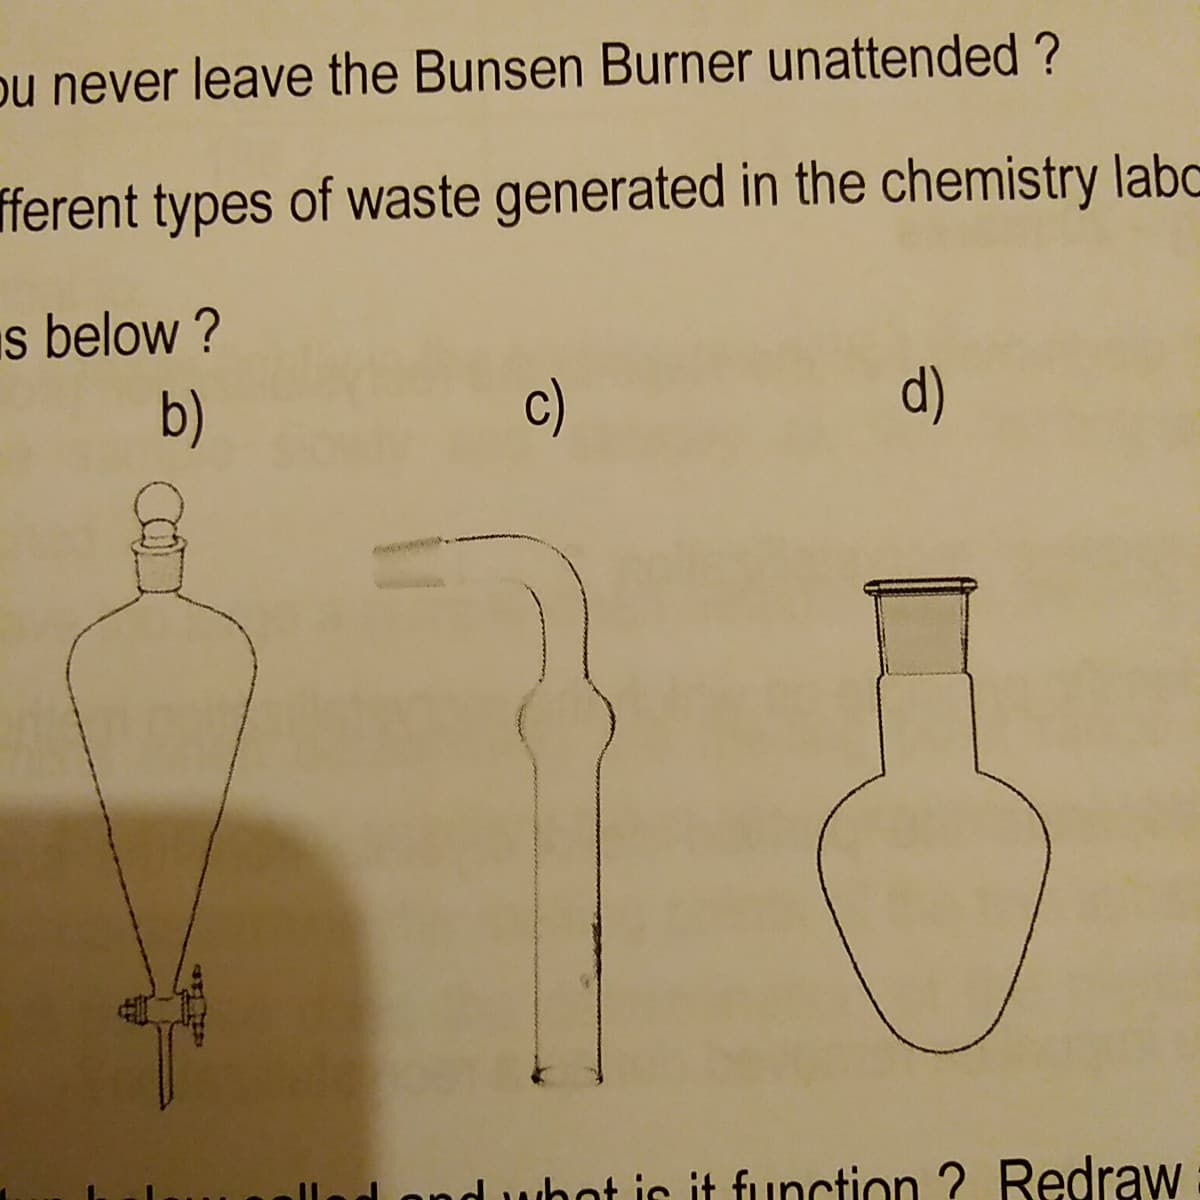 ou never leave the Bunsen Burner unattended ?
fferent types of waste generated in the chemistry labo
s below?
b)
d)
ad what is it function? Redraw